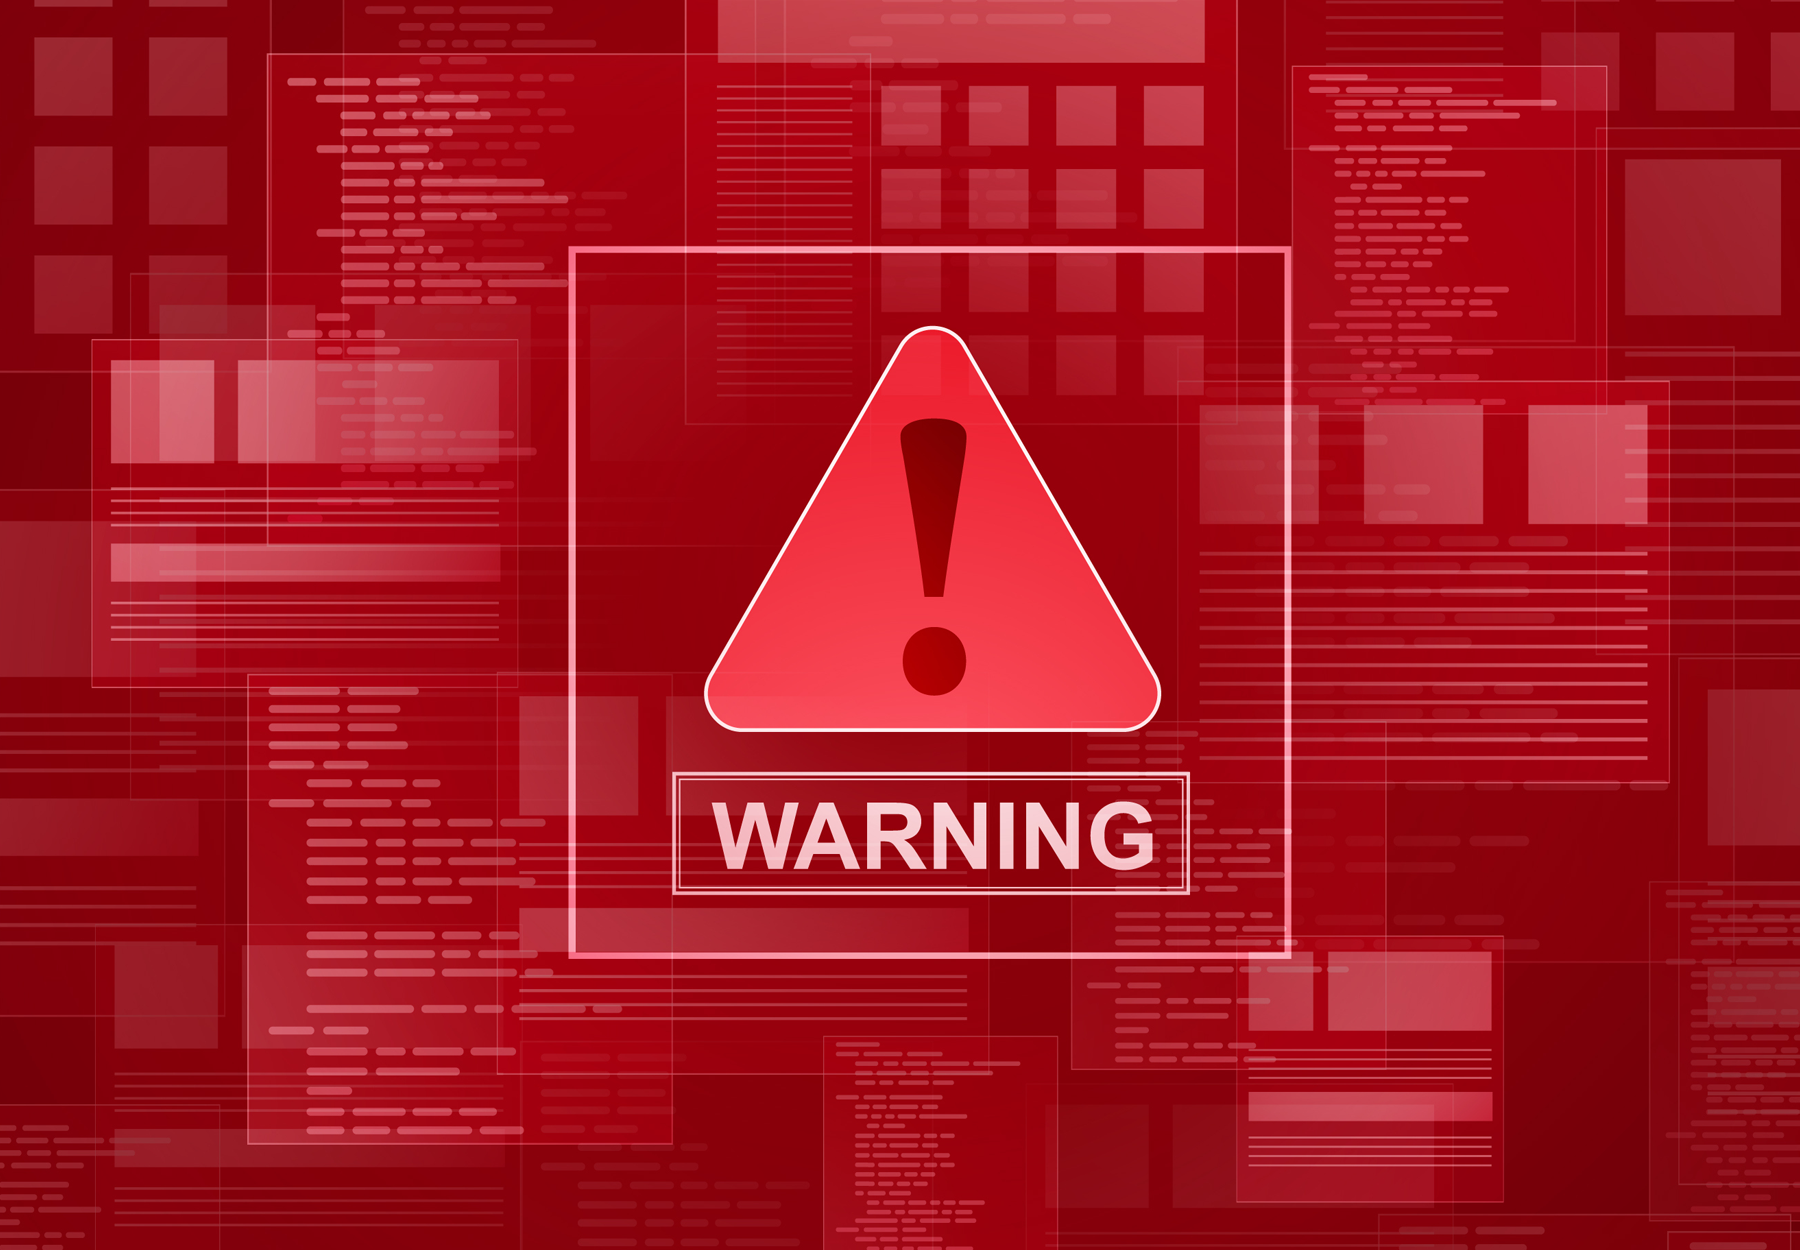 Red warning sign on various screens. Stock illustration.